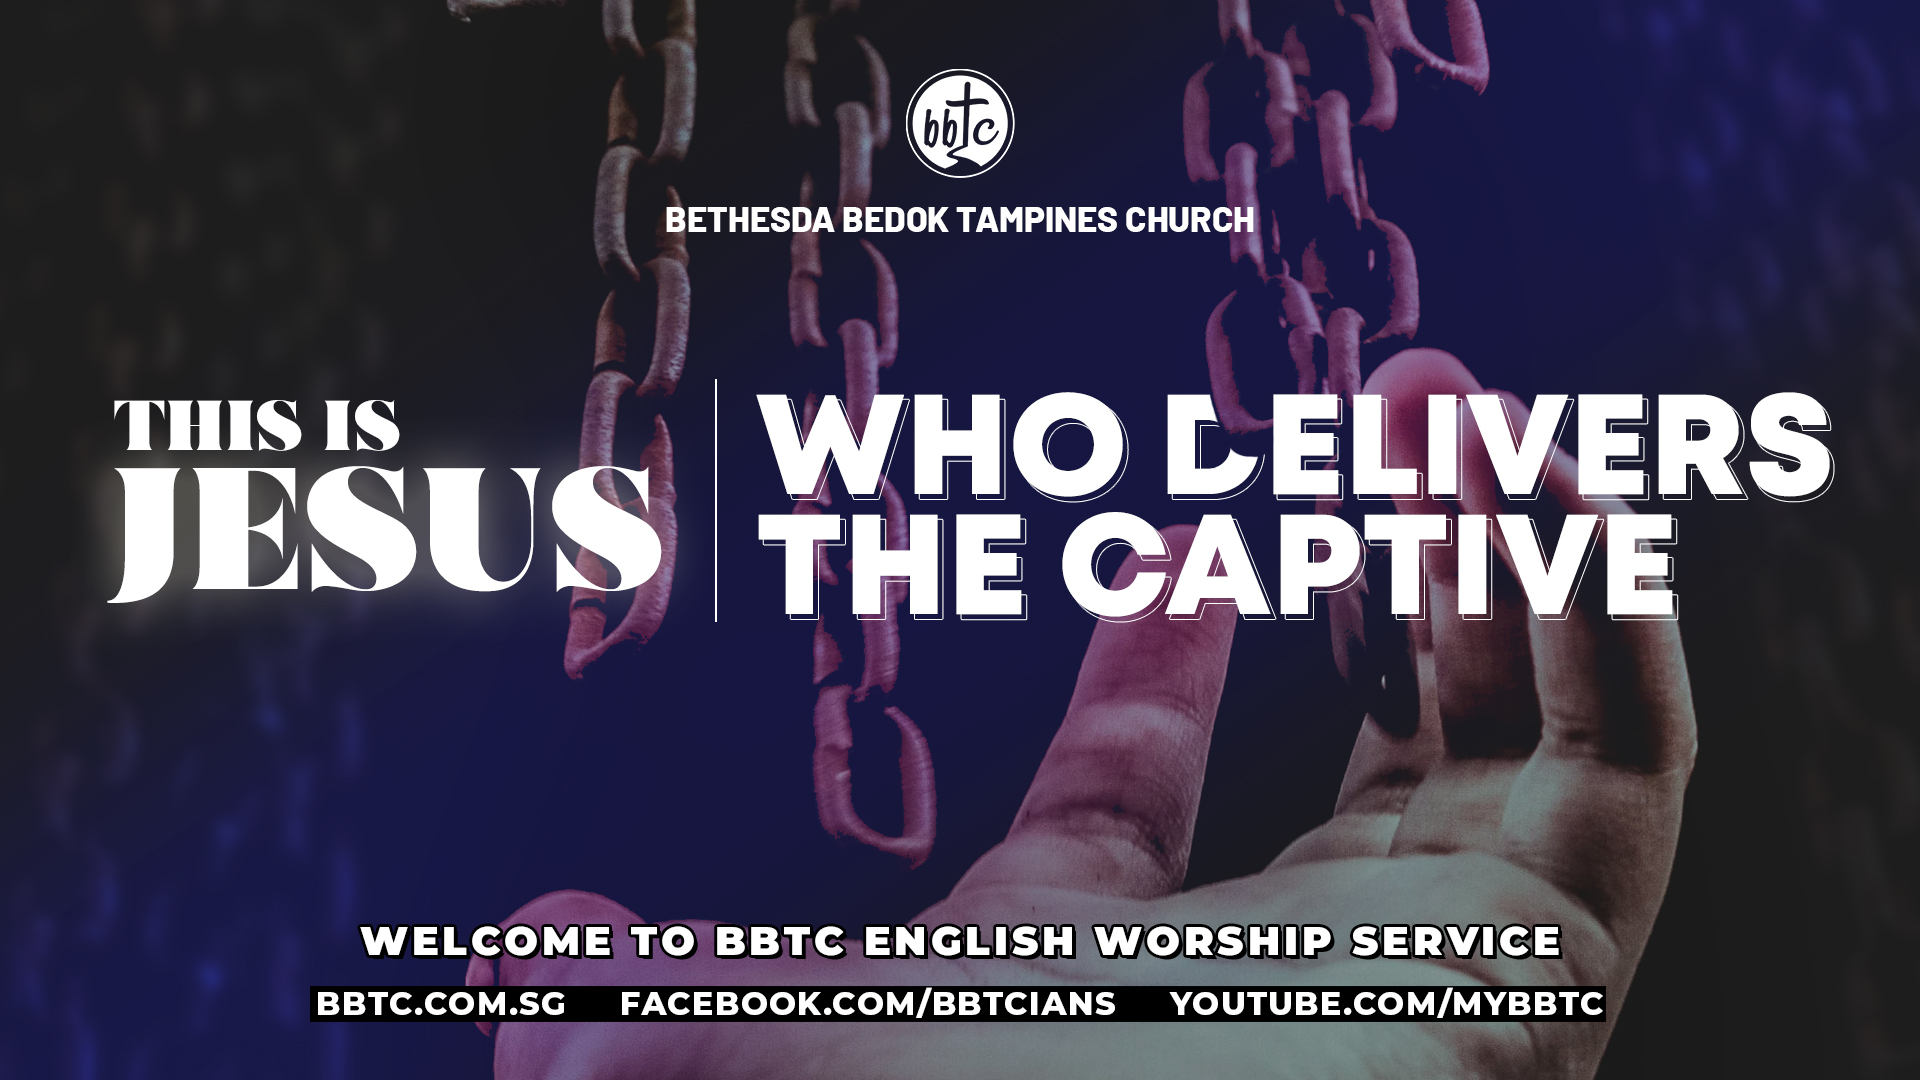 THIS IS JESUS WHO DELIVERS THE CAPTIVE